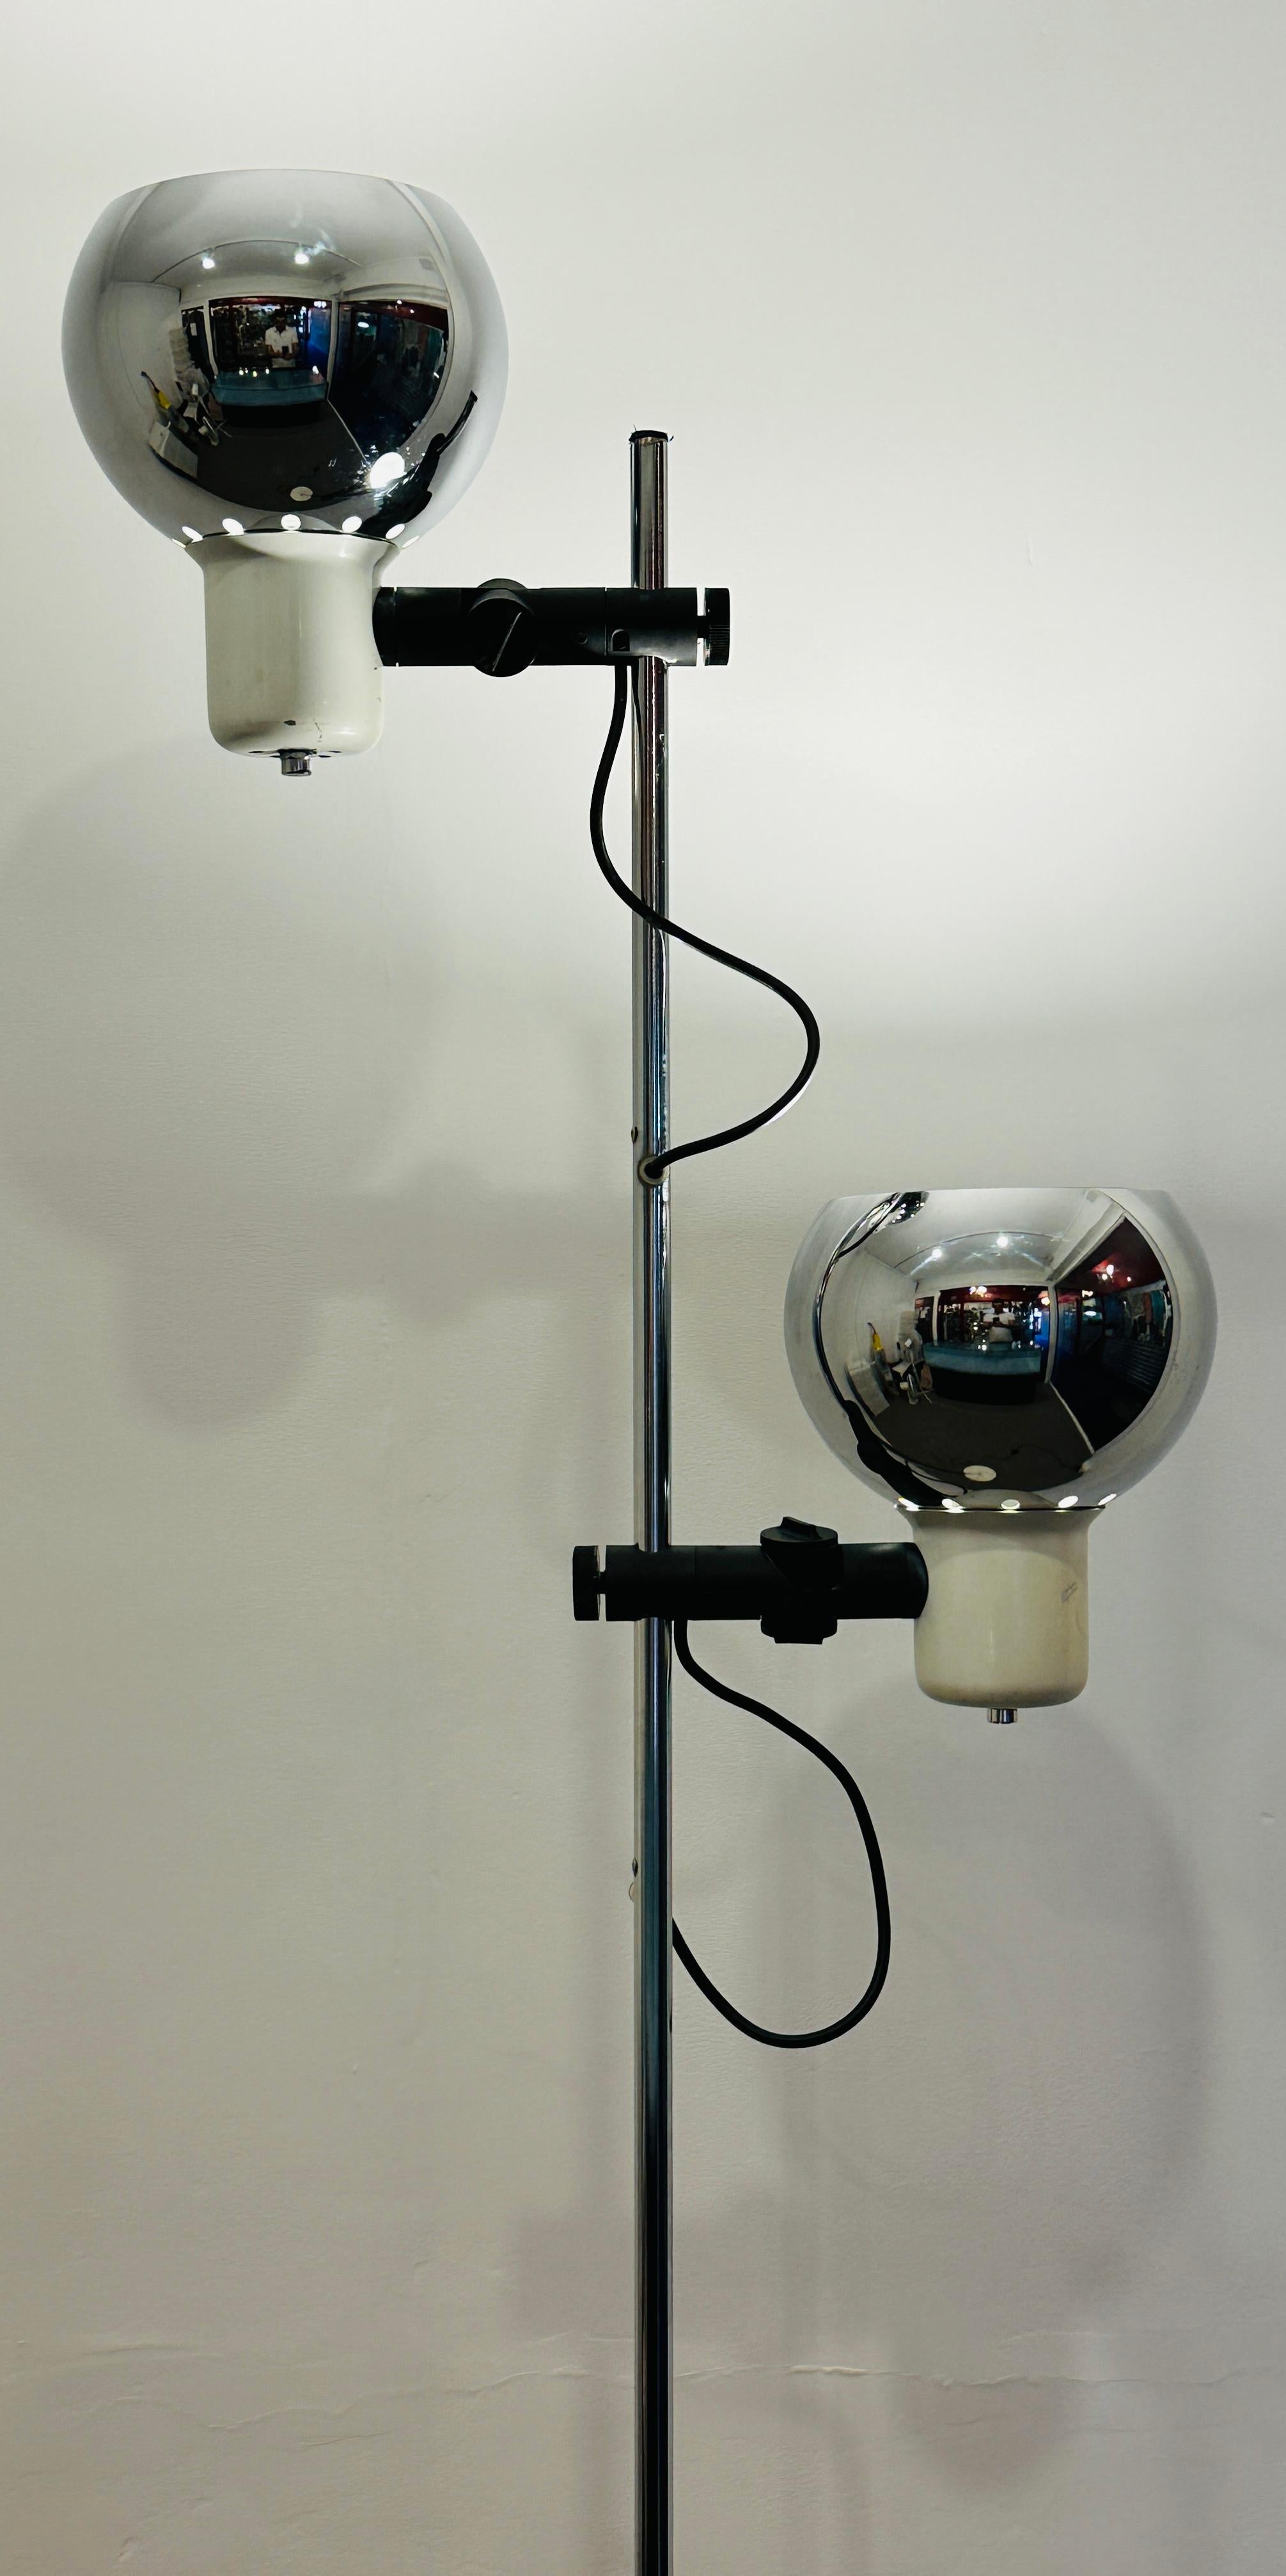 A functional and stylishly designed 1970s vintage chrome space-age two mushroom-shaped eyeball shade floor lamp   Manufactured by Herda in the Netherlands.  The two chromed-metal mushroom shaped eyeball spots are fully adjustable in any direction